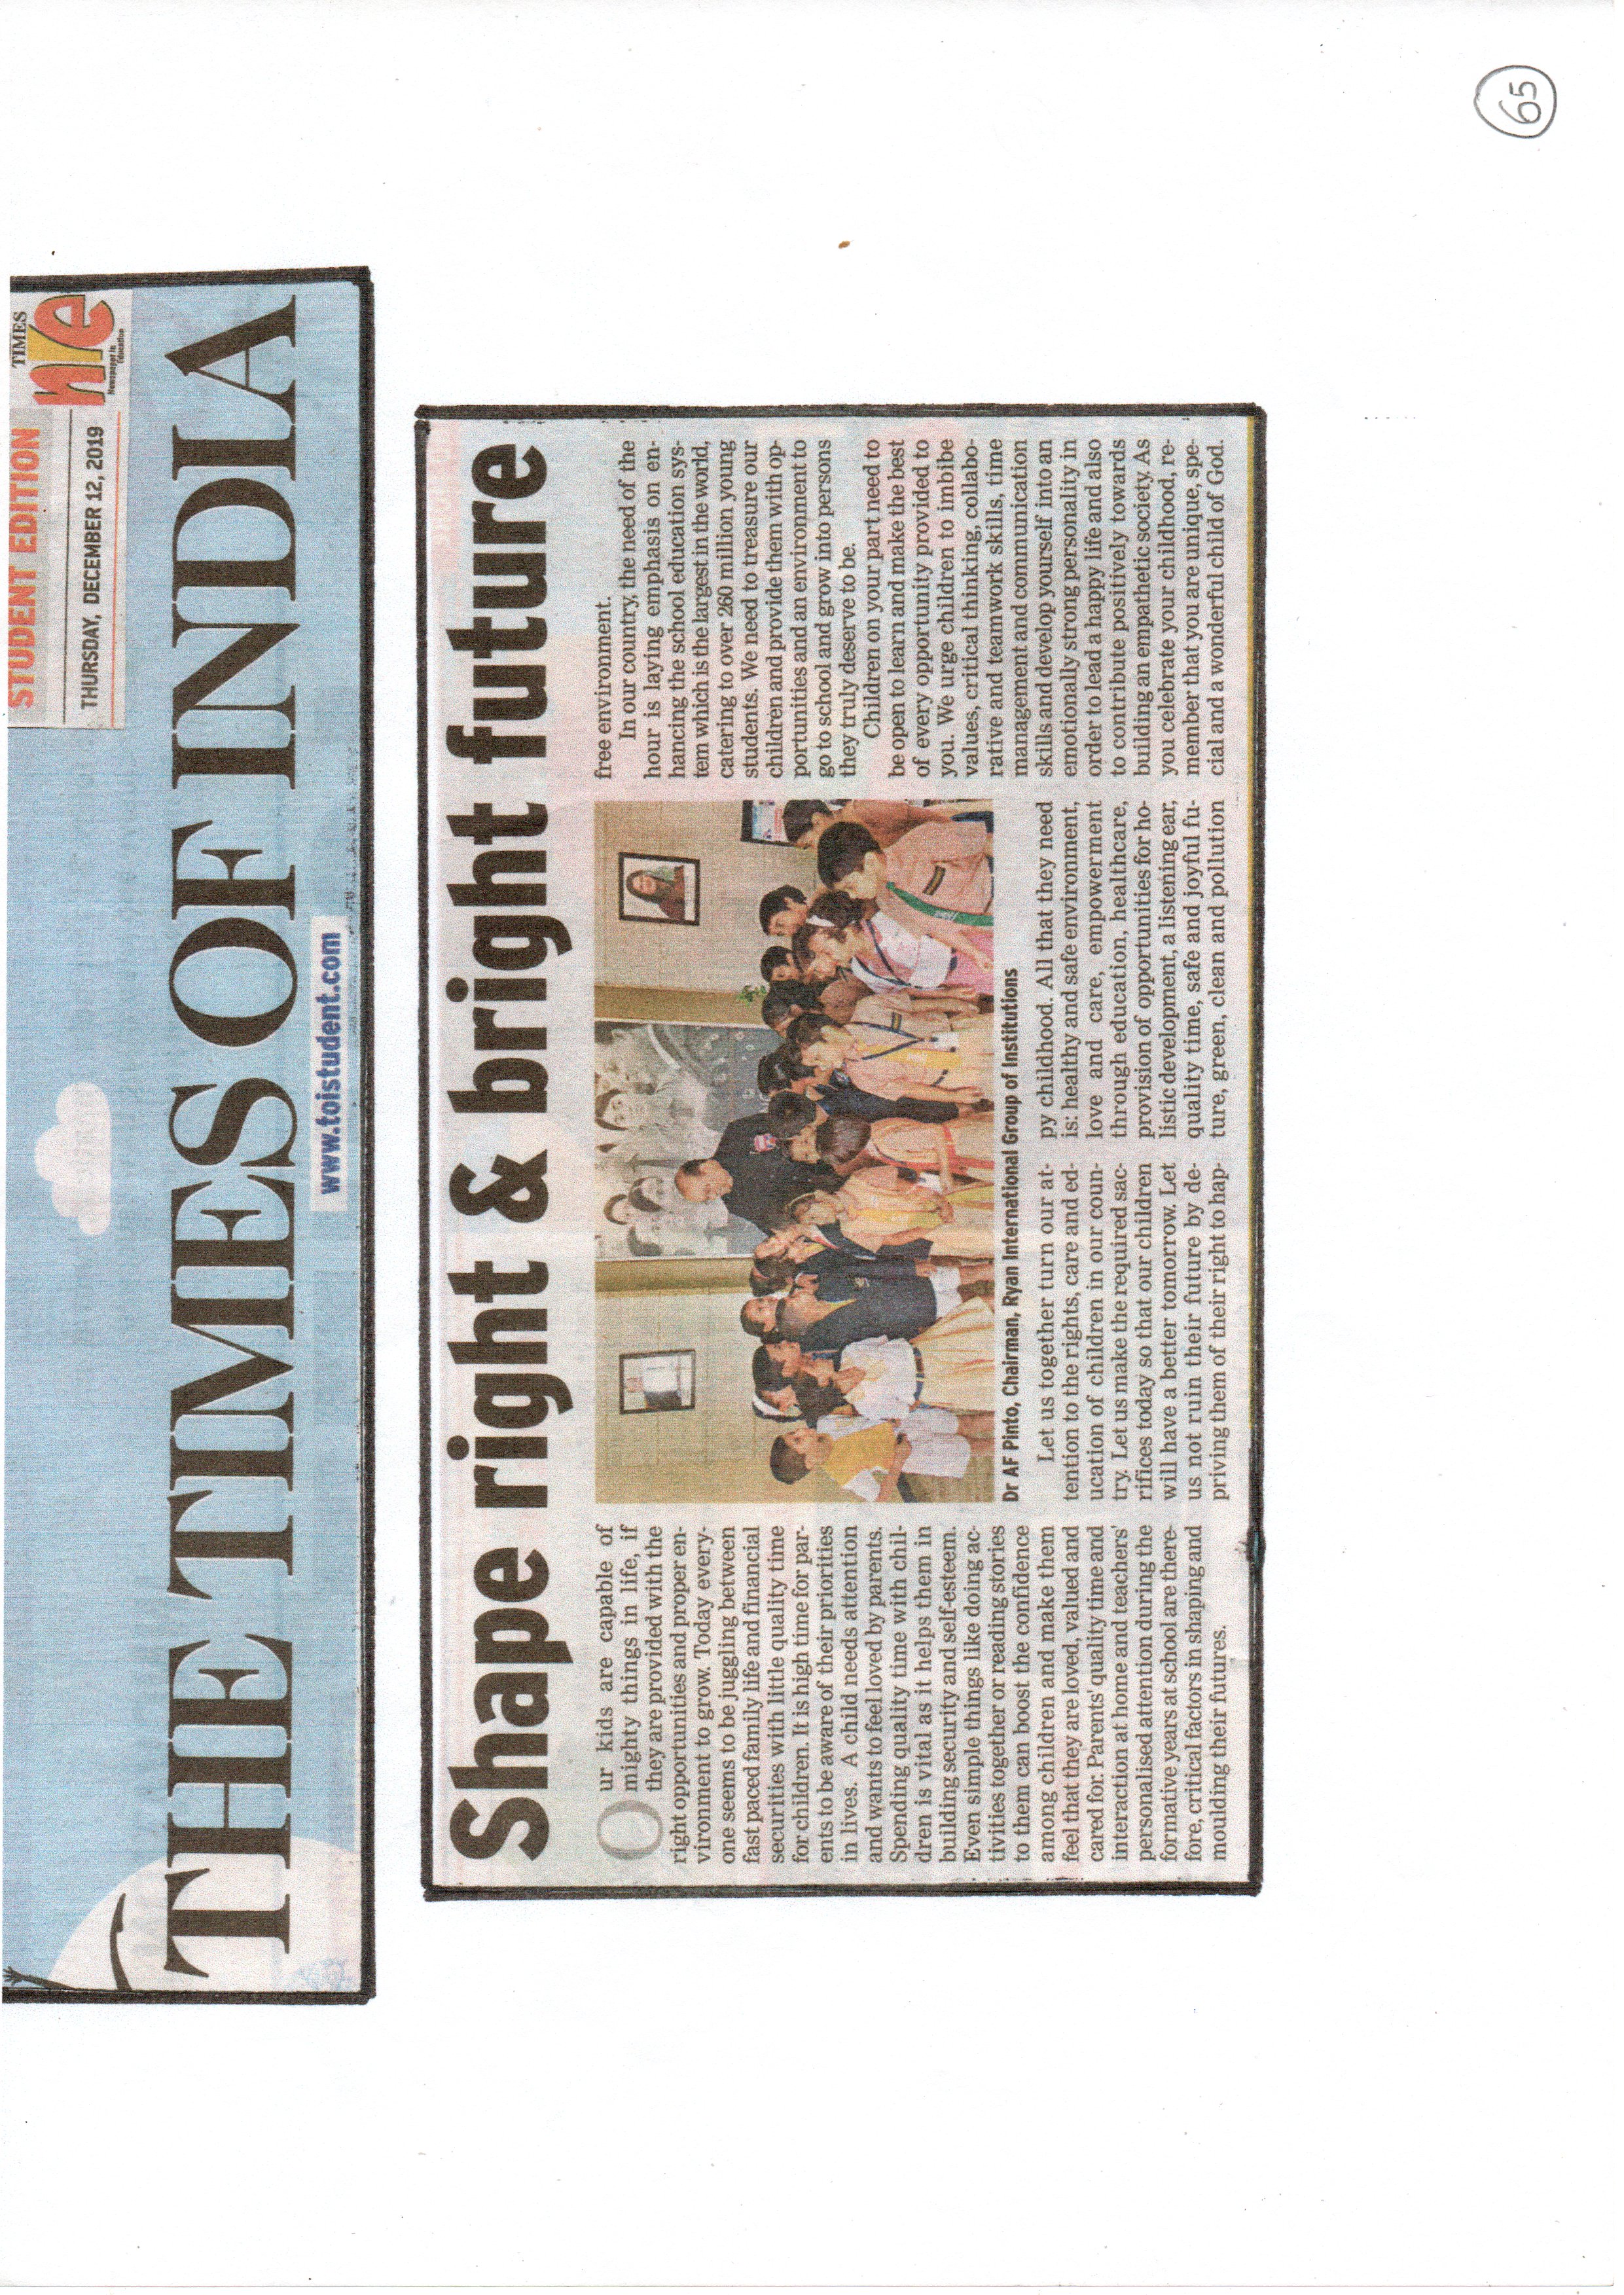 Chairman Sir Article - Shape right and bright future - Ryan International School, Sector 39